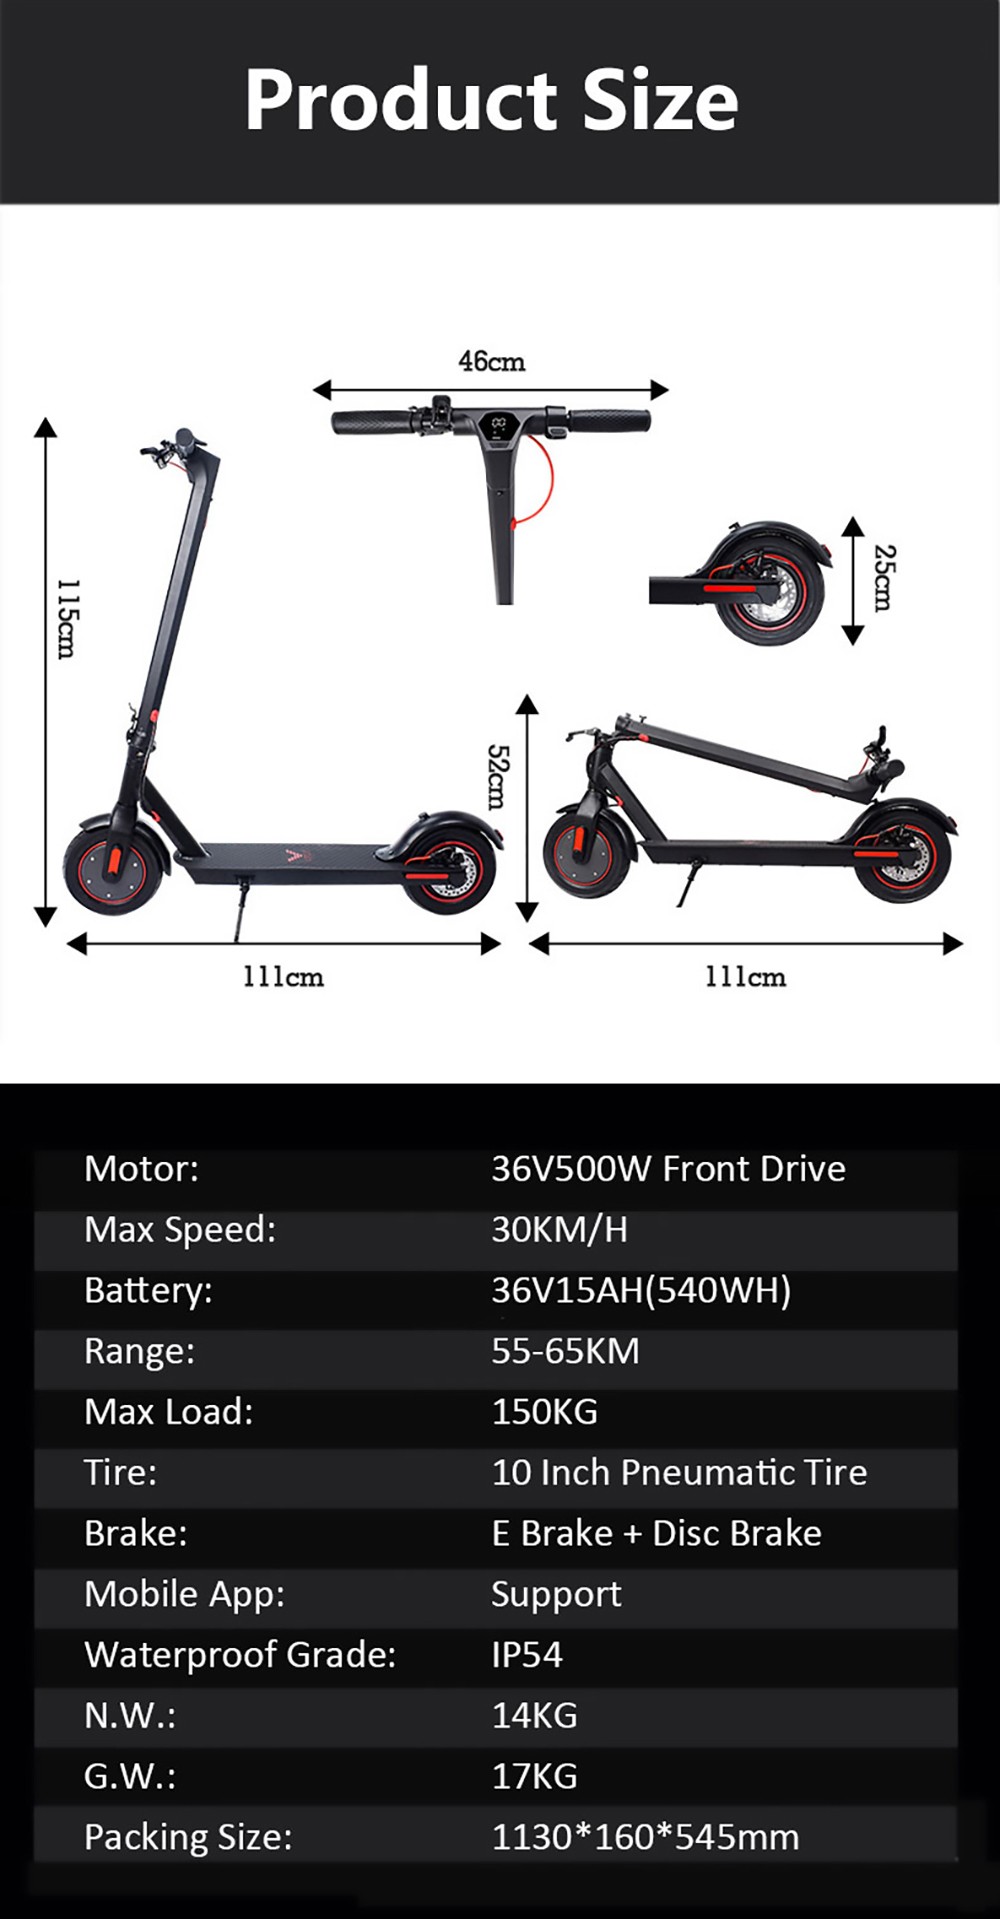 CMSBIKE V10 Electric Scooter 10'' Air Tires 500W Motor 36V 15Ah Battery Max Speed 30km/h Max Load 120kg - Black